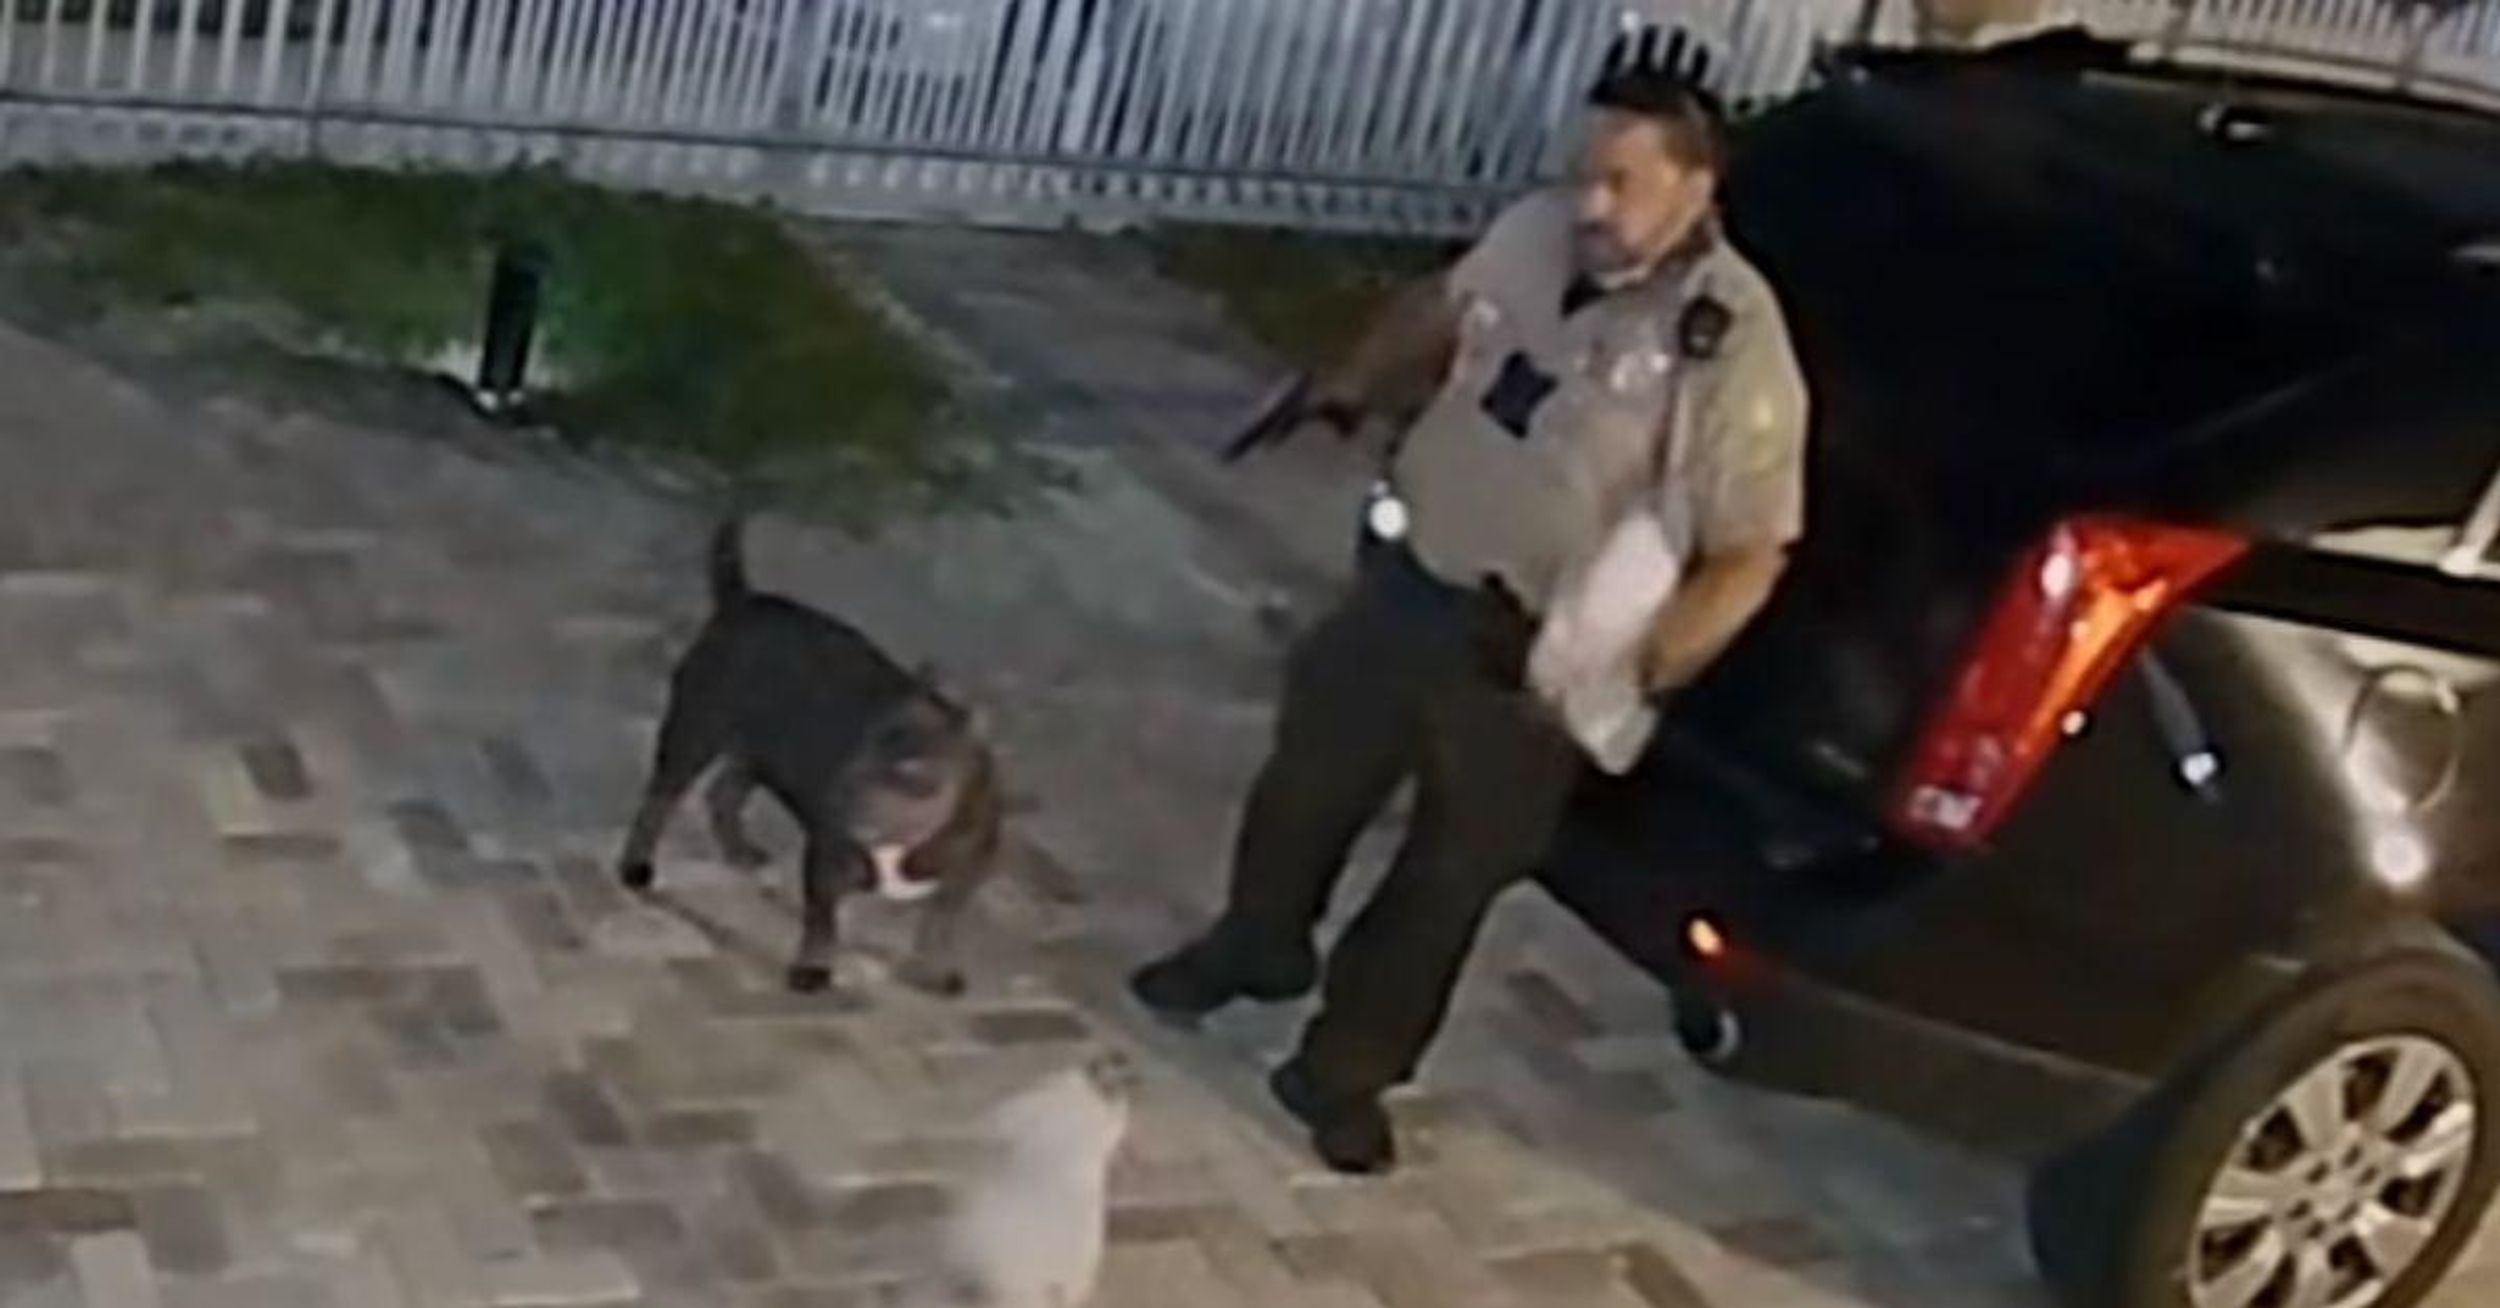 Family Horrified After Florida Cop Shoots Puppy Six Times While Responding To 'Barking Complaint' In Surveillance Video